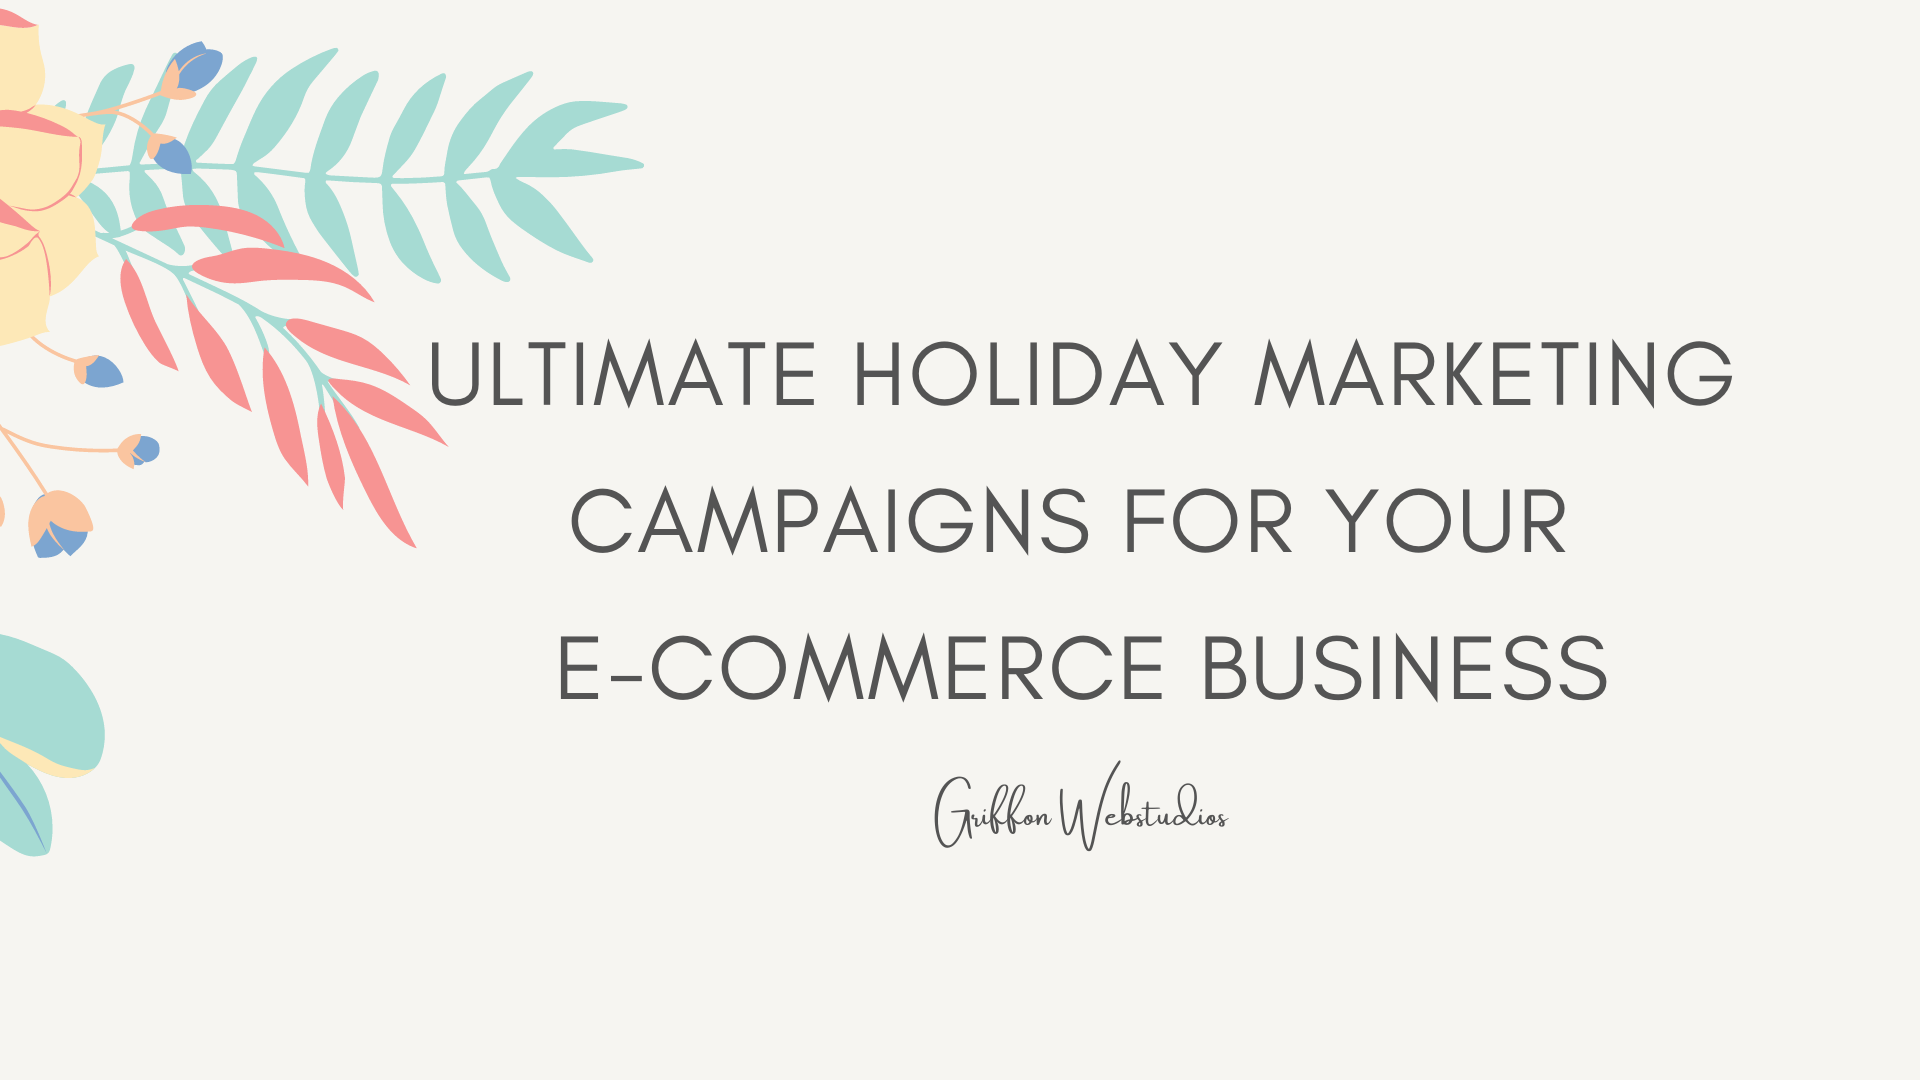 Ultimate Holiday Marketing Campaigns for Your E-Commerce Business